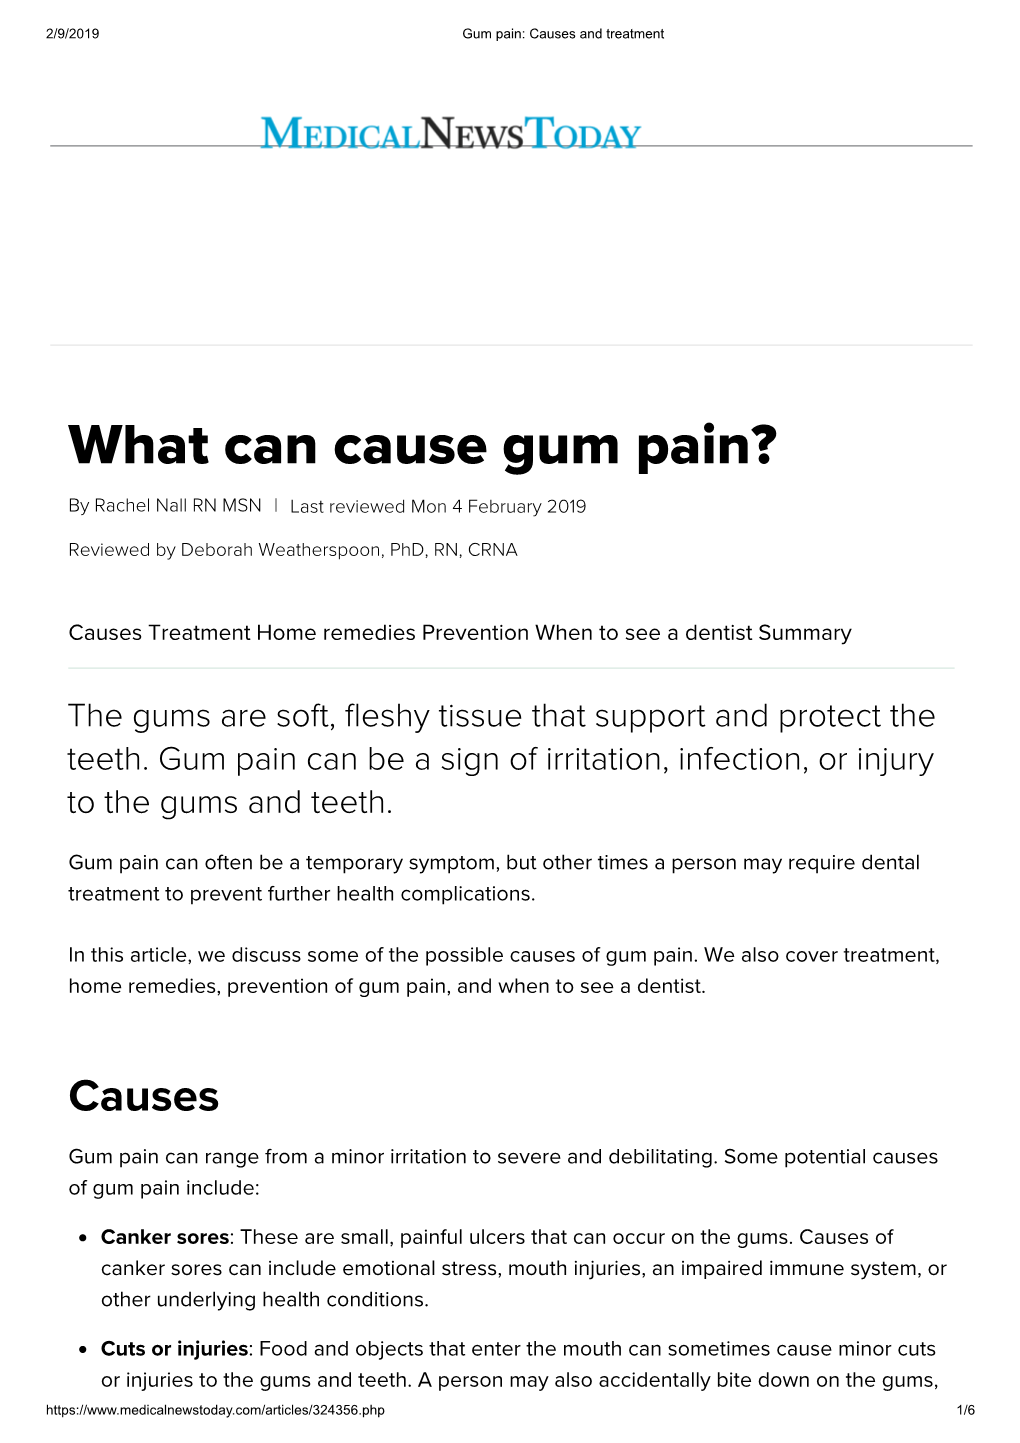 What Can Cause Gum Pain?